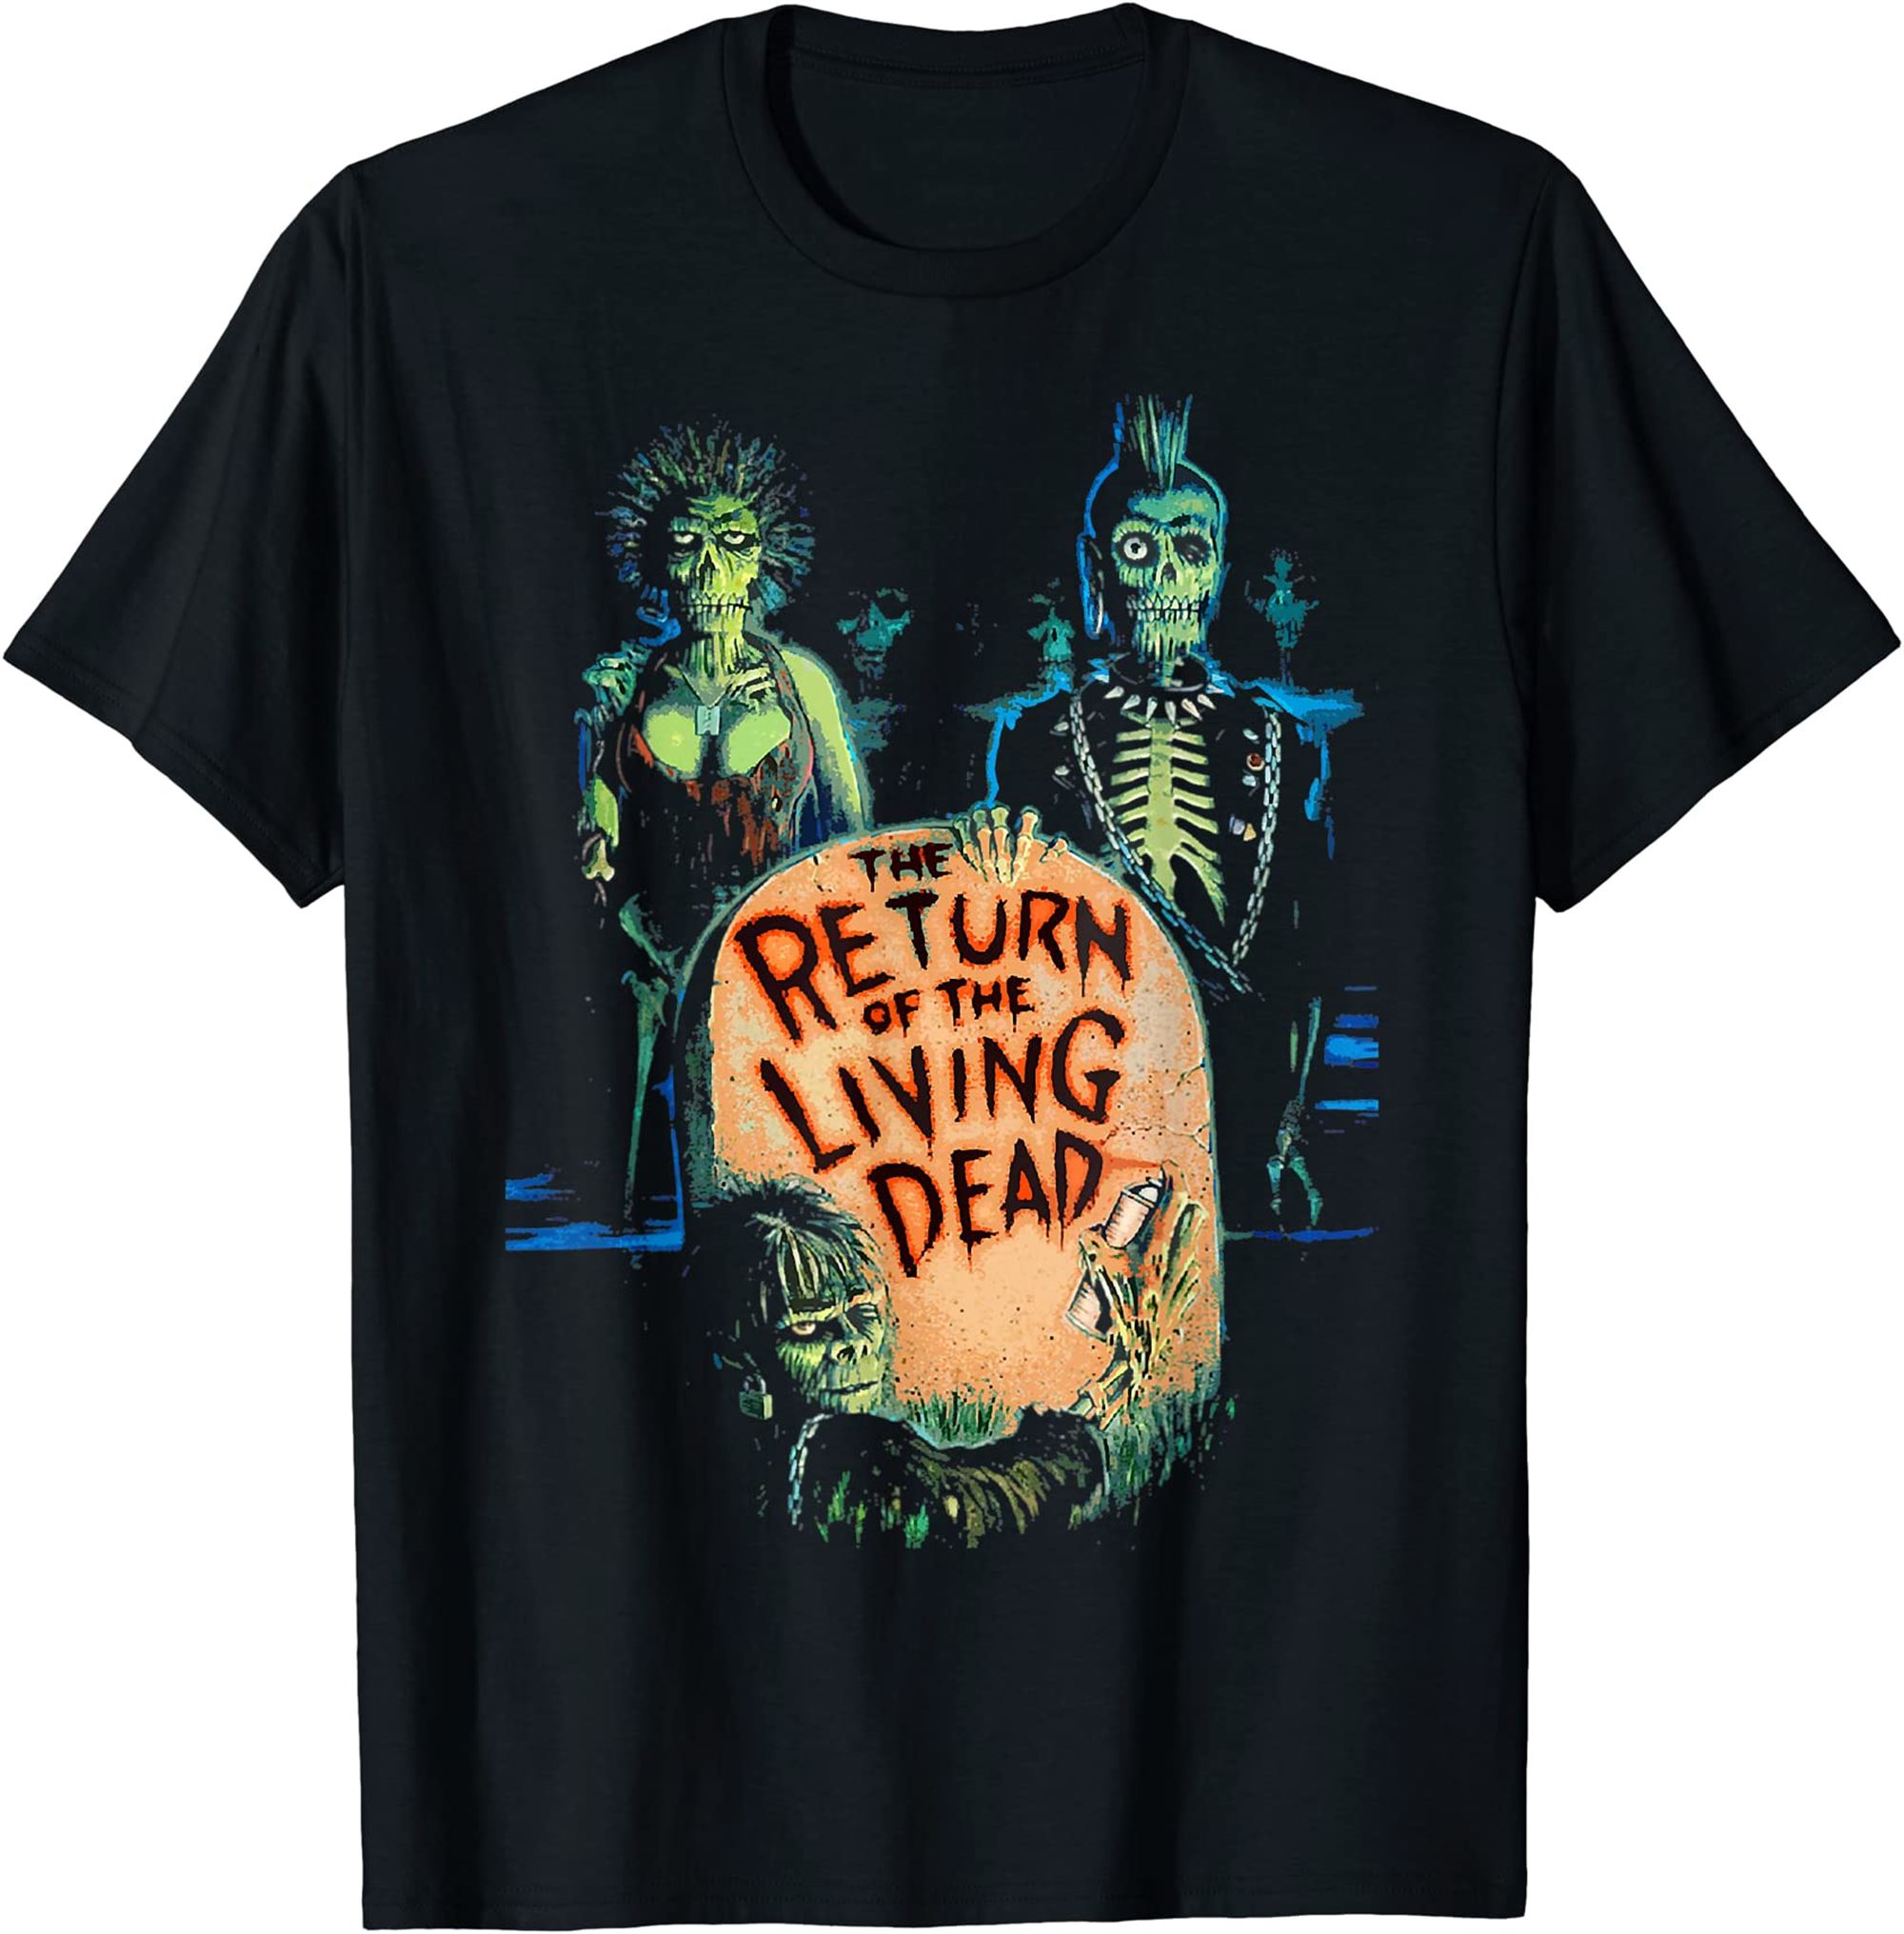 The Returns Of The Living Deads T-shirt Plus Size Up To 5xl